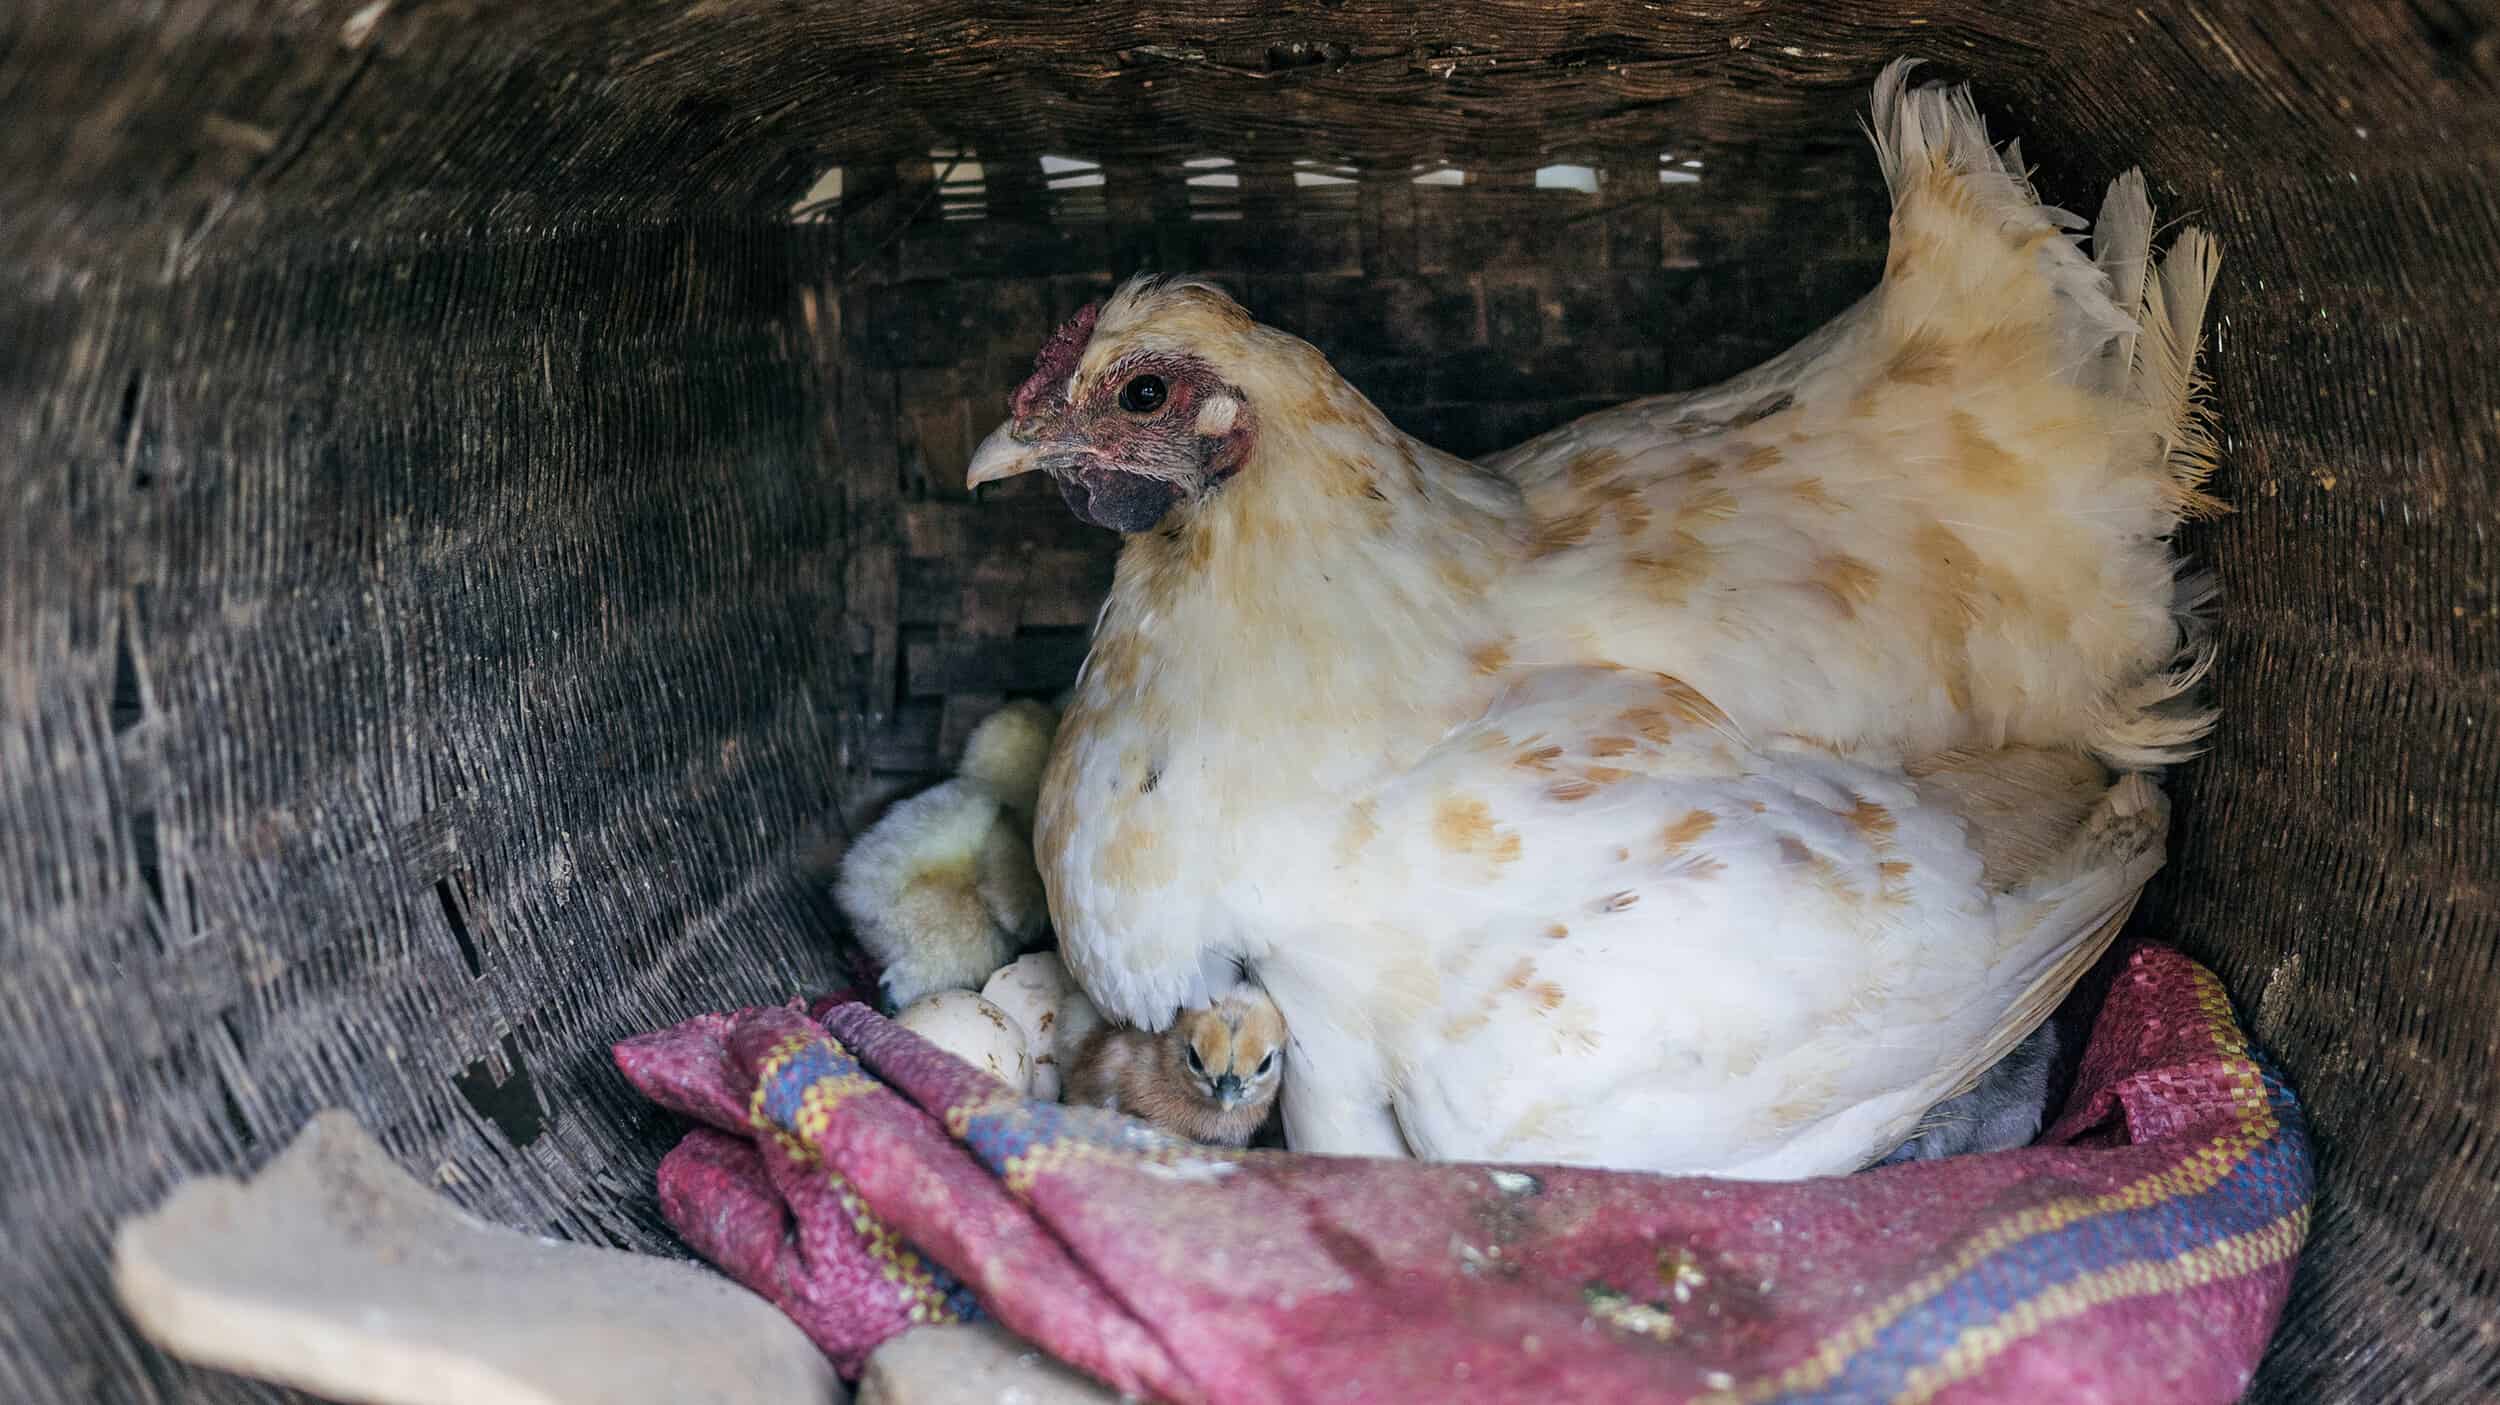 How to Stop Hens Being Broody